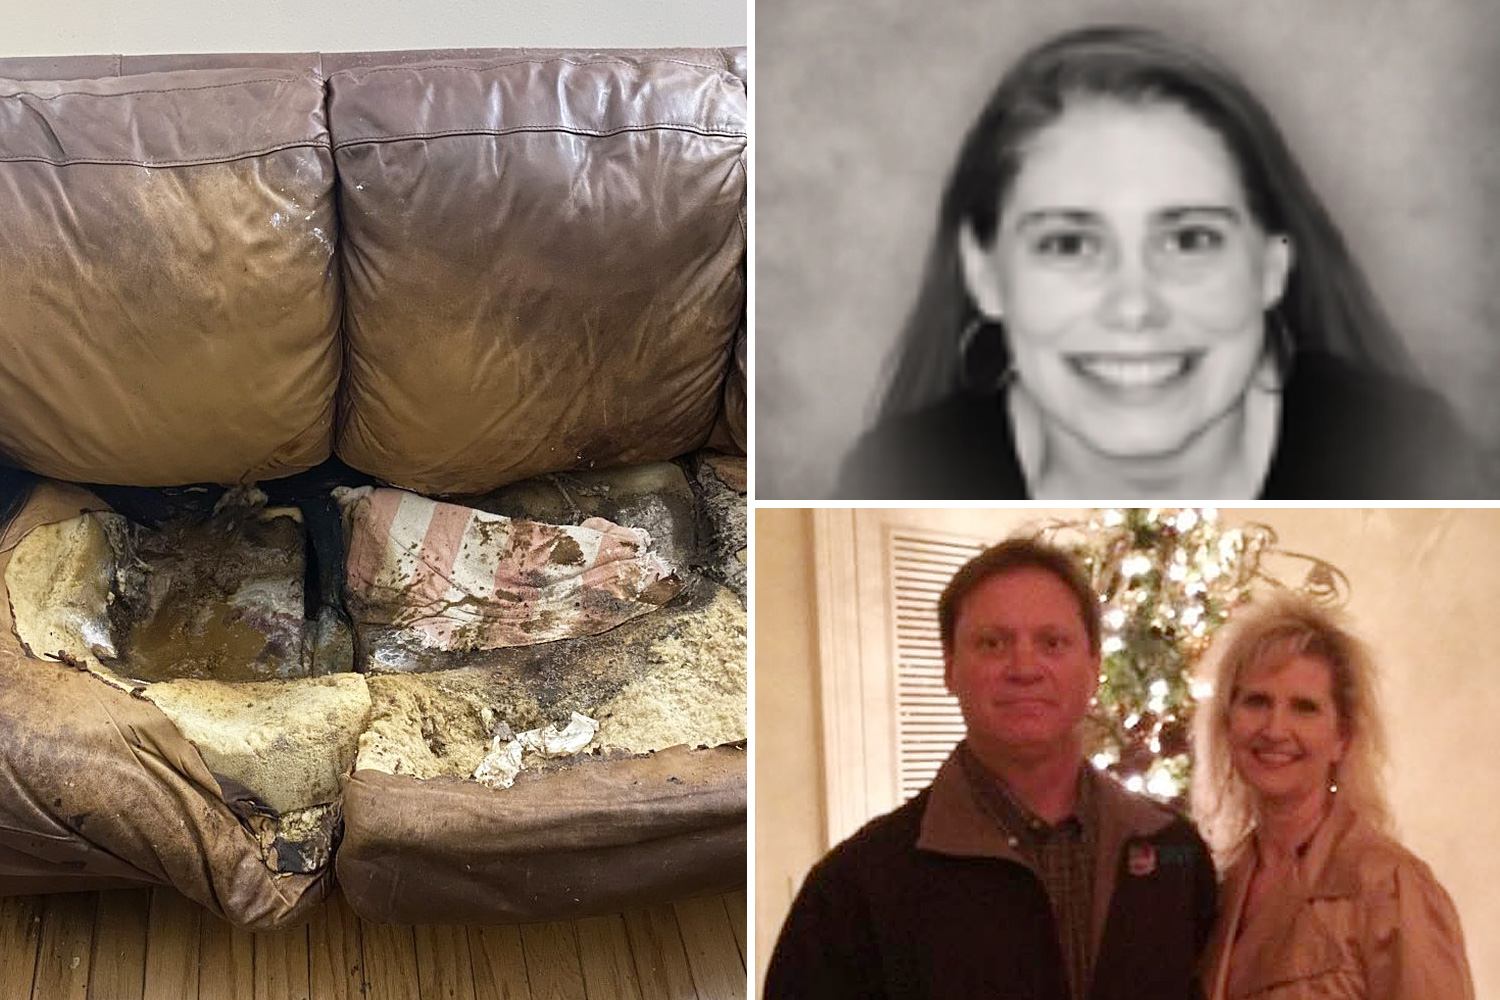 Horror pics show fecescovered couch that FUSED to body of recluse, 36